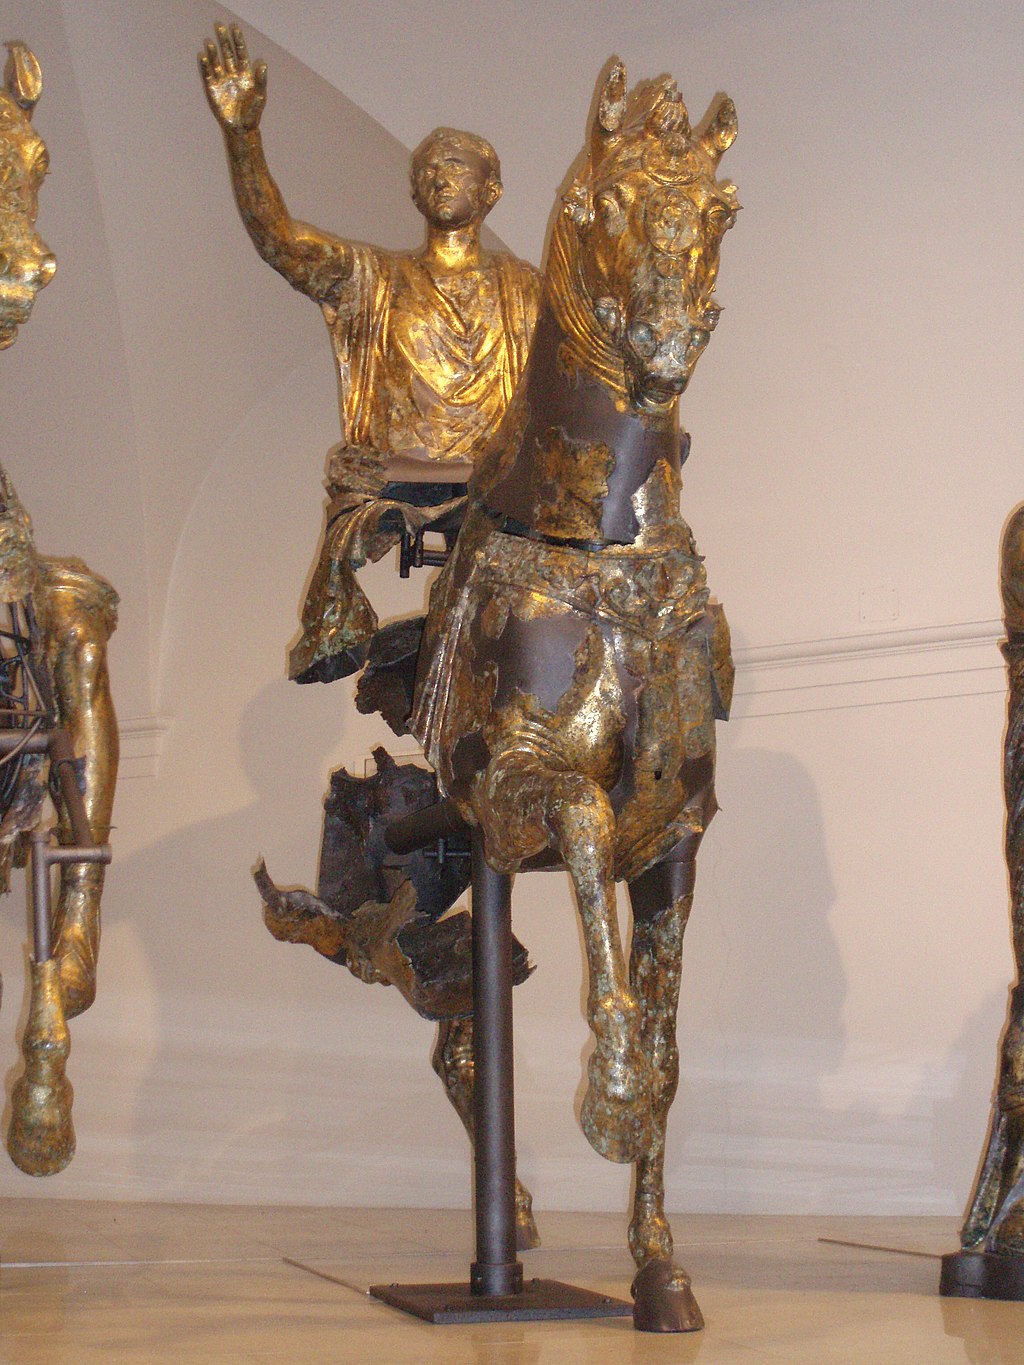 Statues of the Gilded Bronze Museums and of the City of Pergola